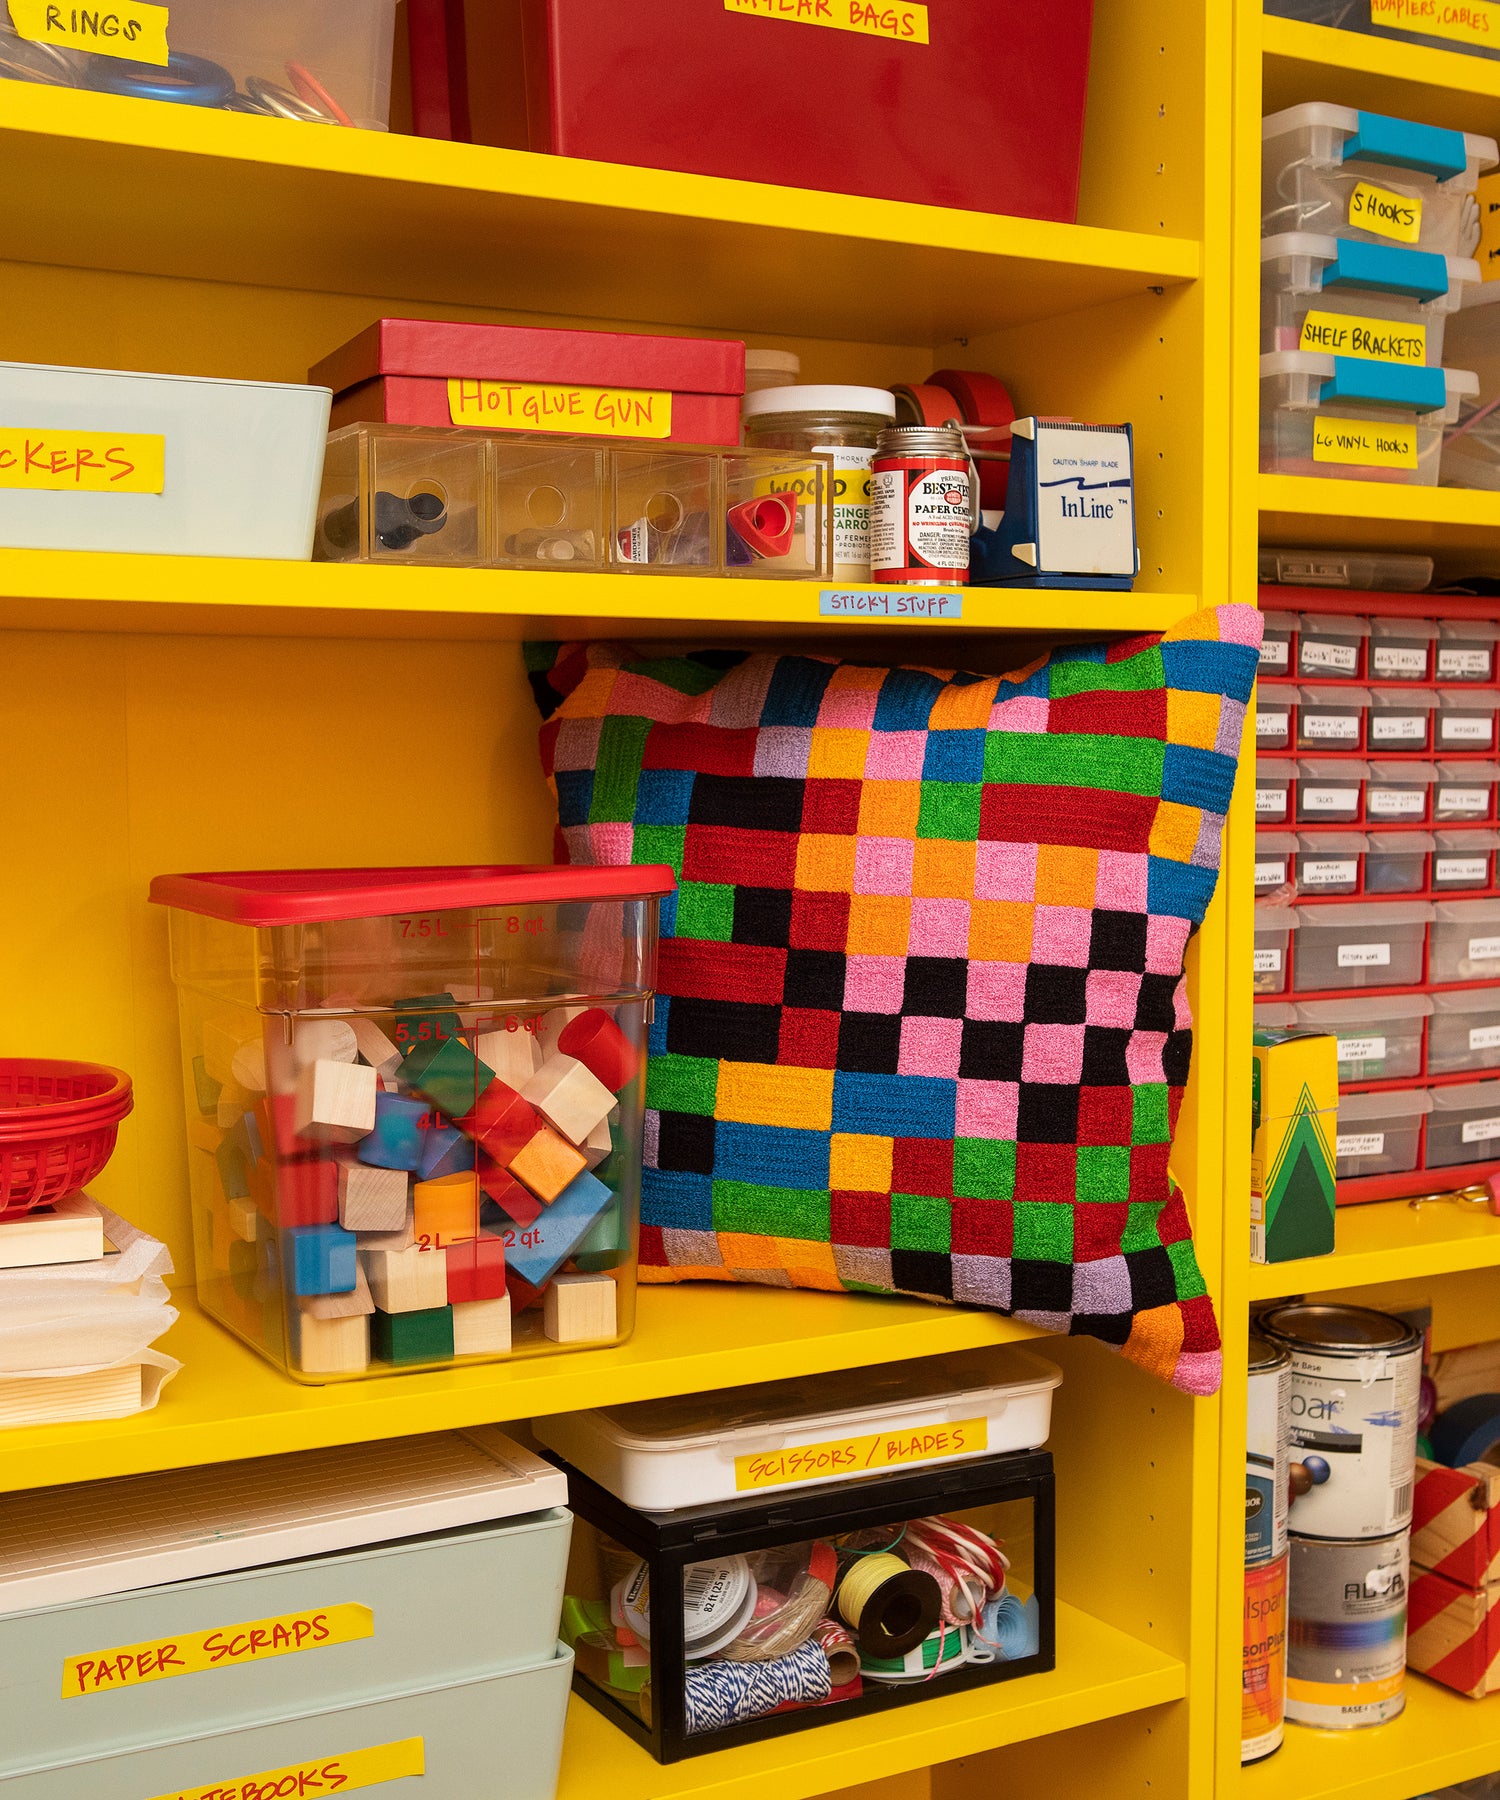 Detail of the Pixels Pillow sitting in a shelf on a yellow bookcase.